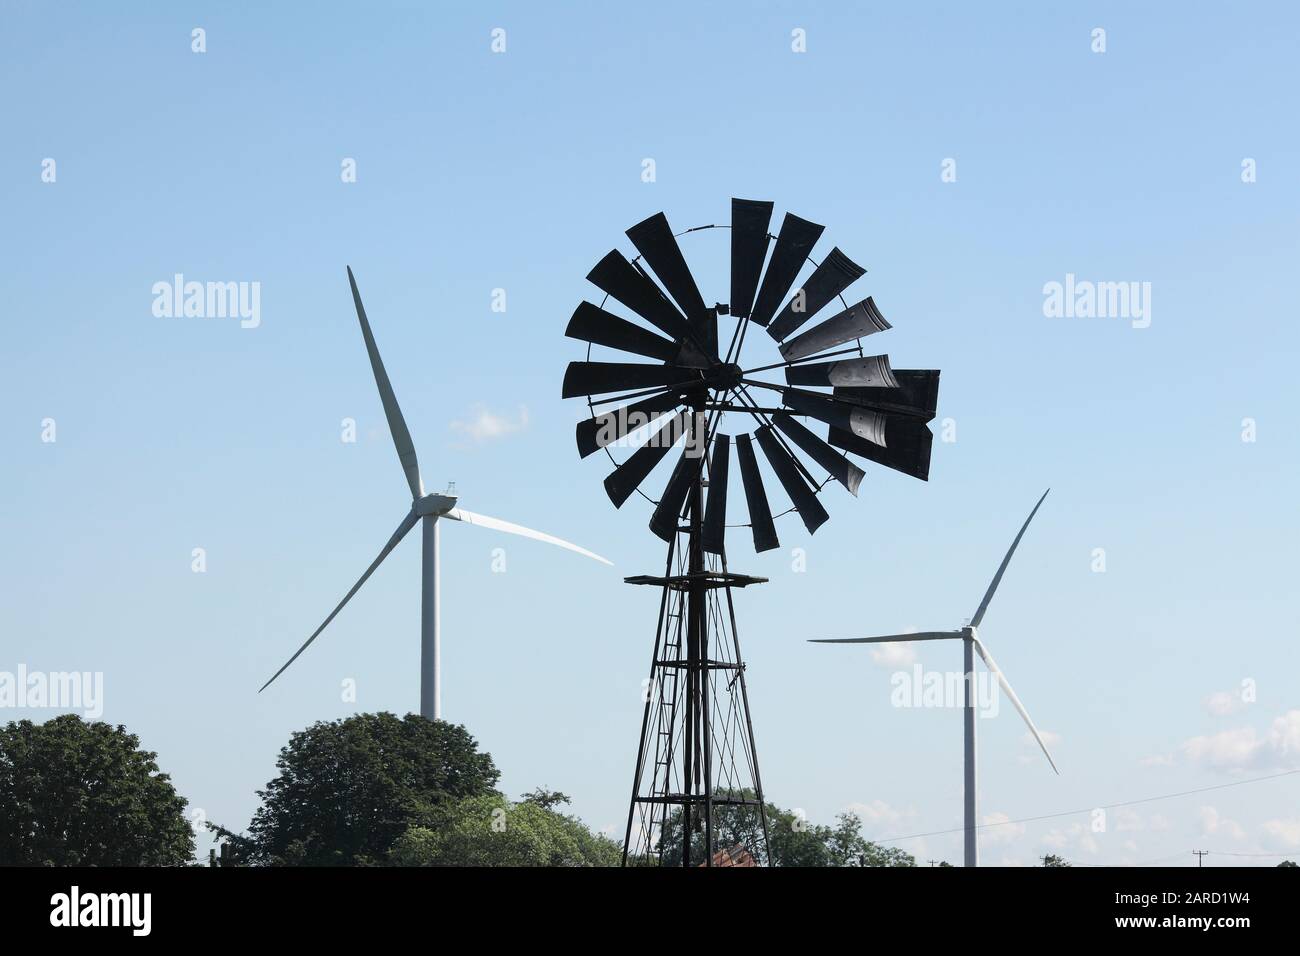 Old and new technology for harnessing the power of the wind: an old, disused multi-vaned wind pump for raising water flanked by modern wind turbines. Stock Photo